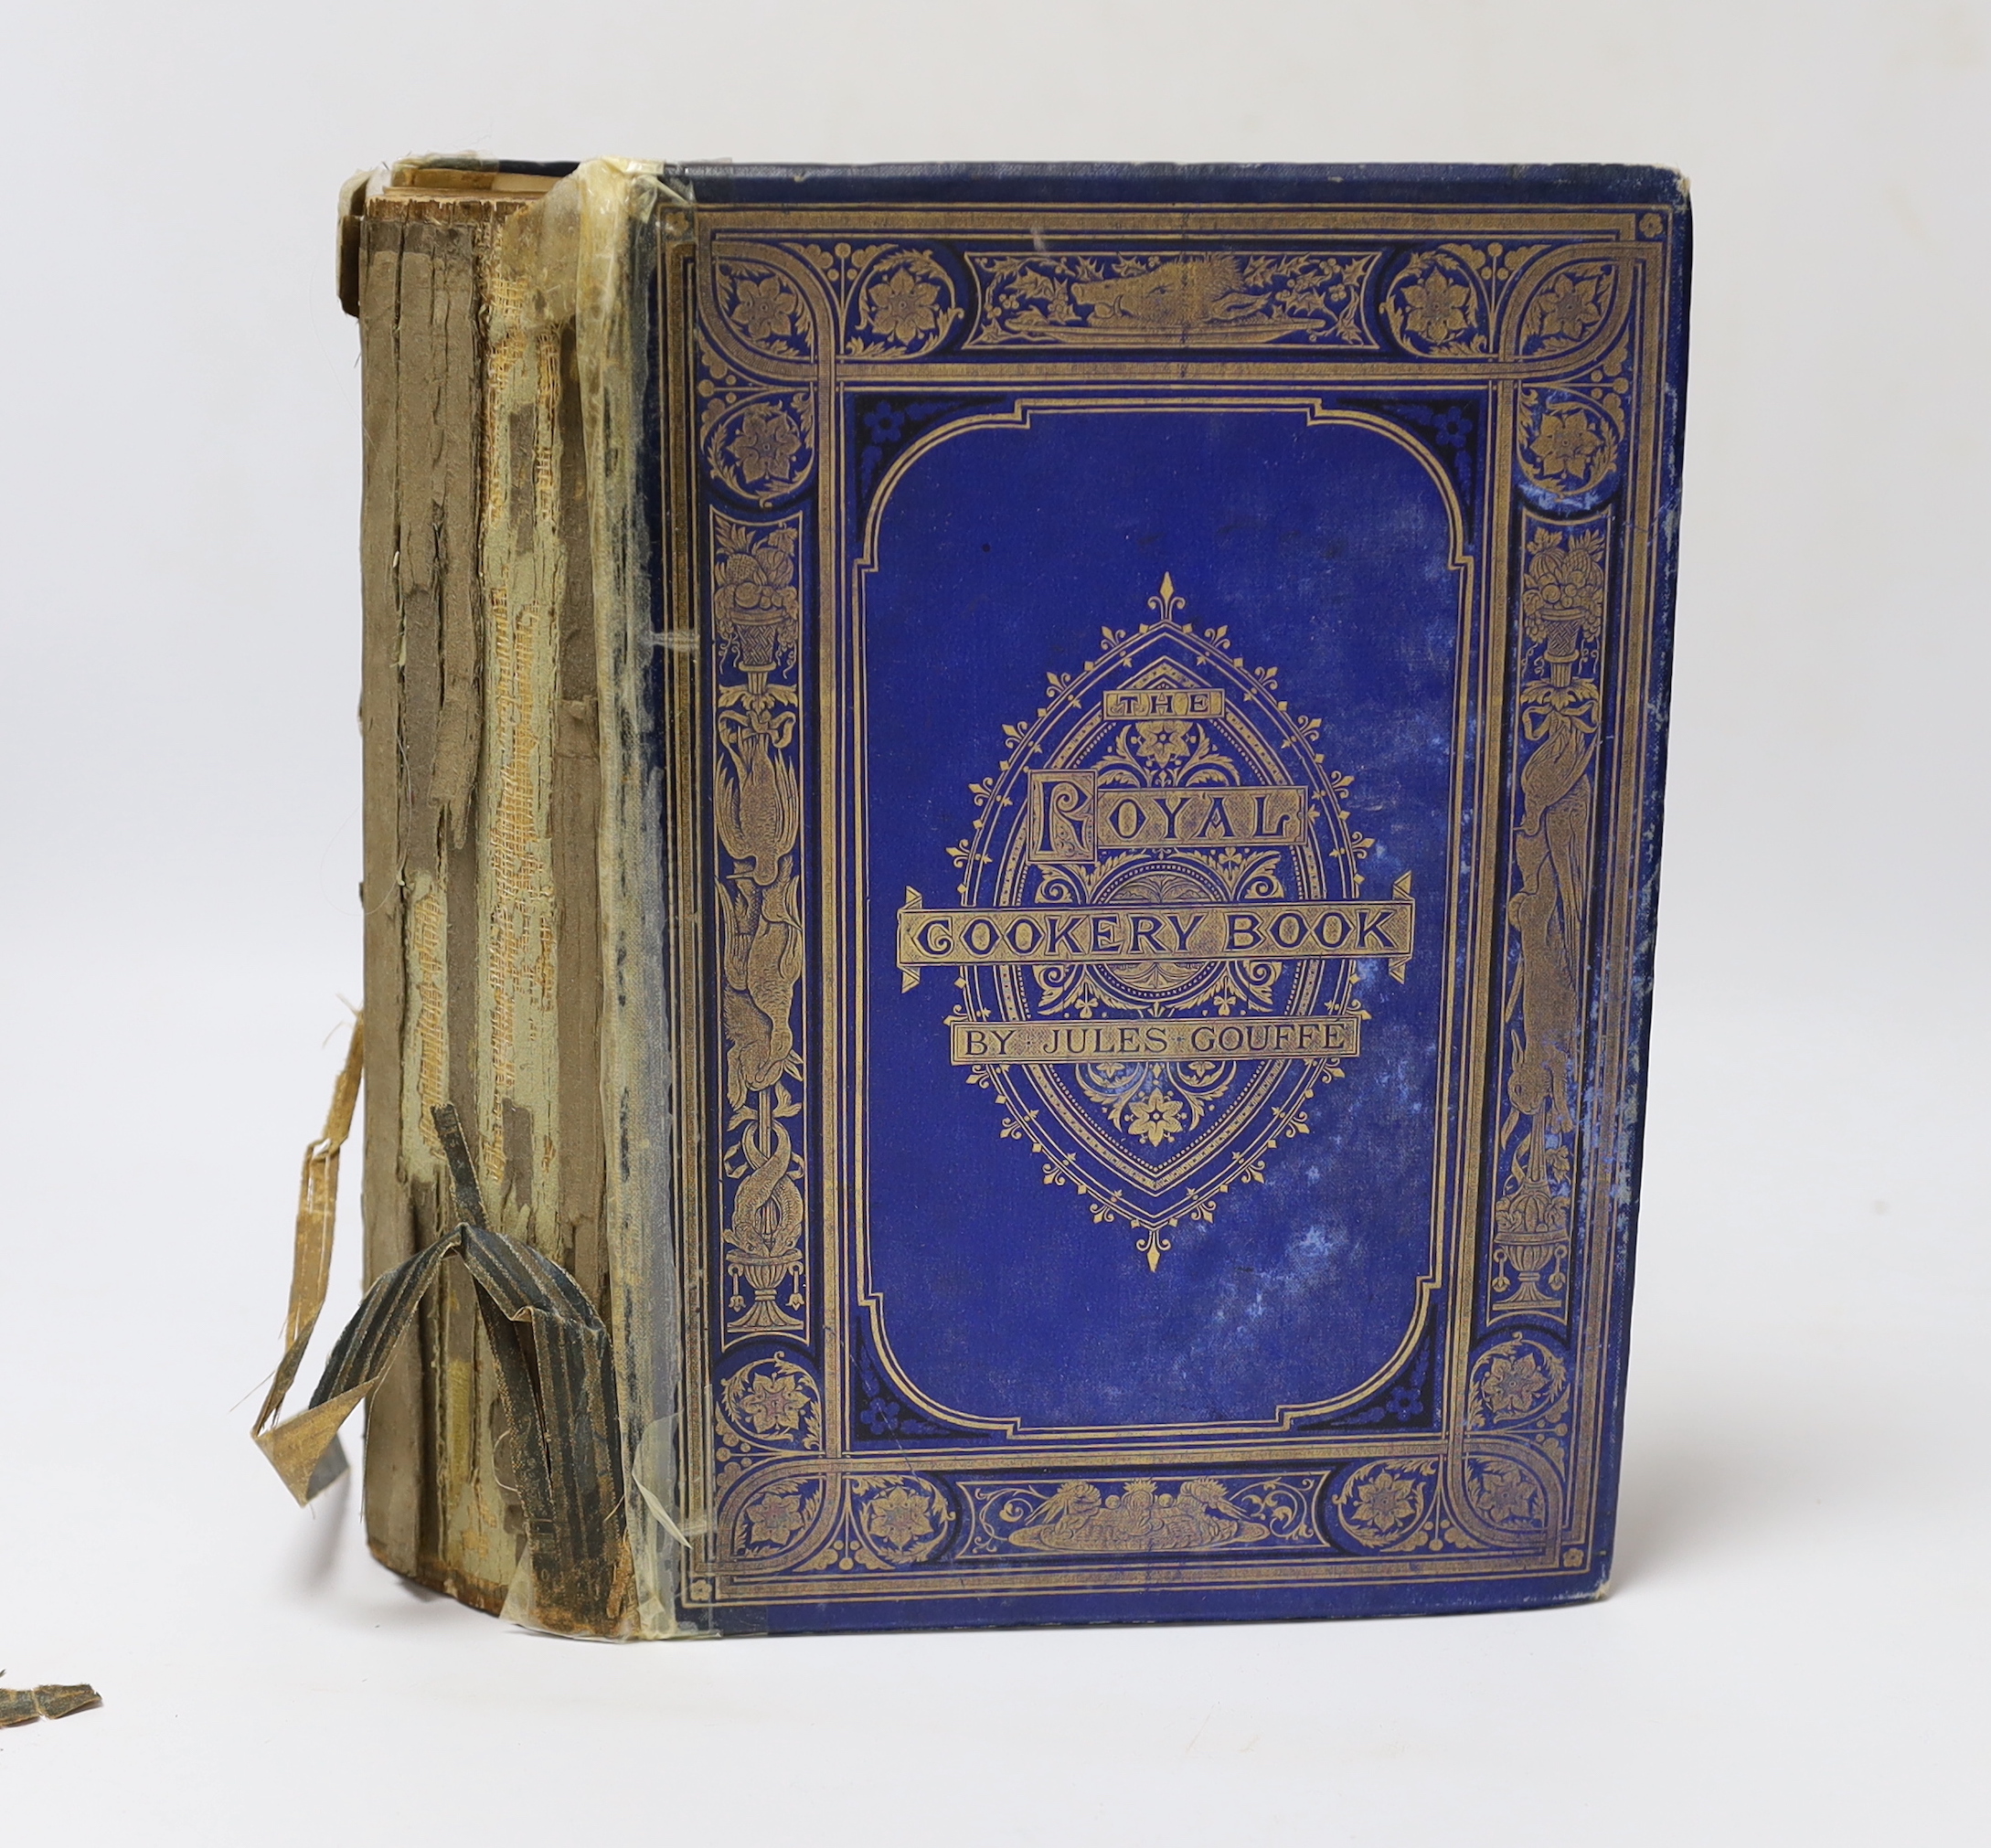 Gouffe, Jules - The Royal Cookery Book (Le Livre de Cuisine)…Translated from the French and adapted for English use by Alphonse Gouffe, new edition, 4to, original gilt blocked blue cloth, spine detached and very worn, wi